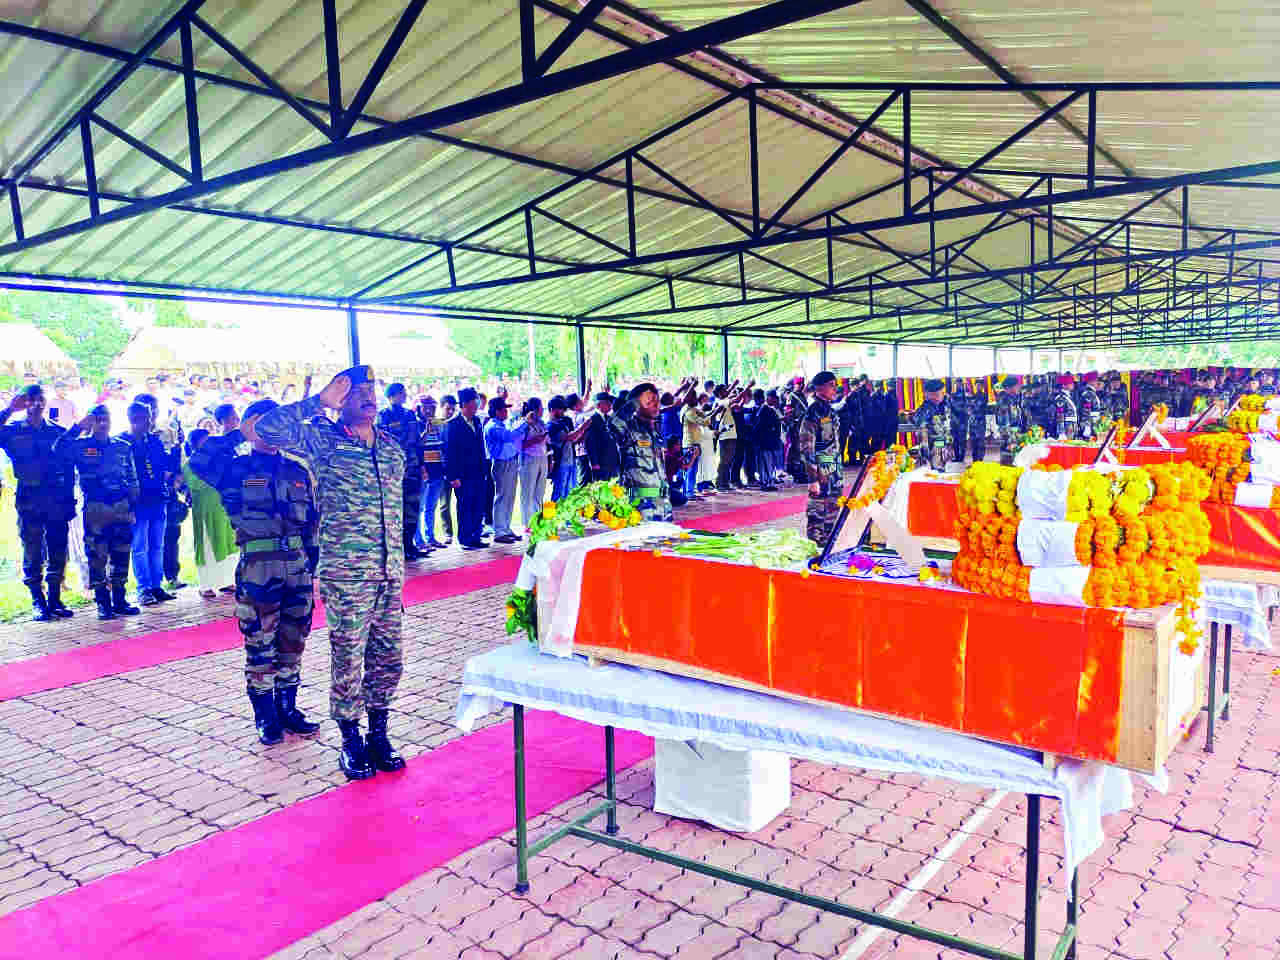 Manipur earthquake: Mortal remains of 11 Army personnel reach Bagdogra airport